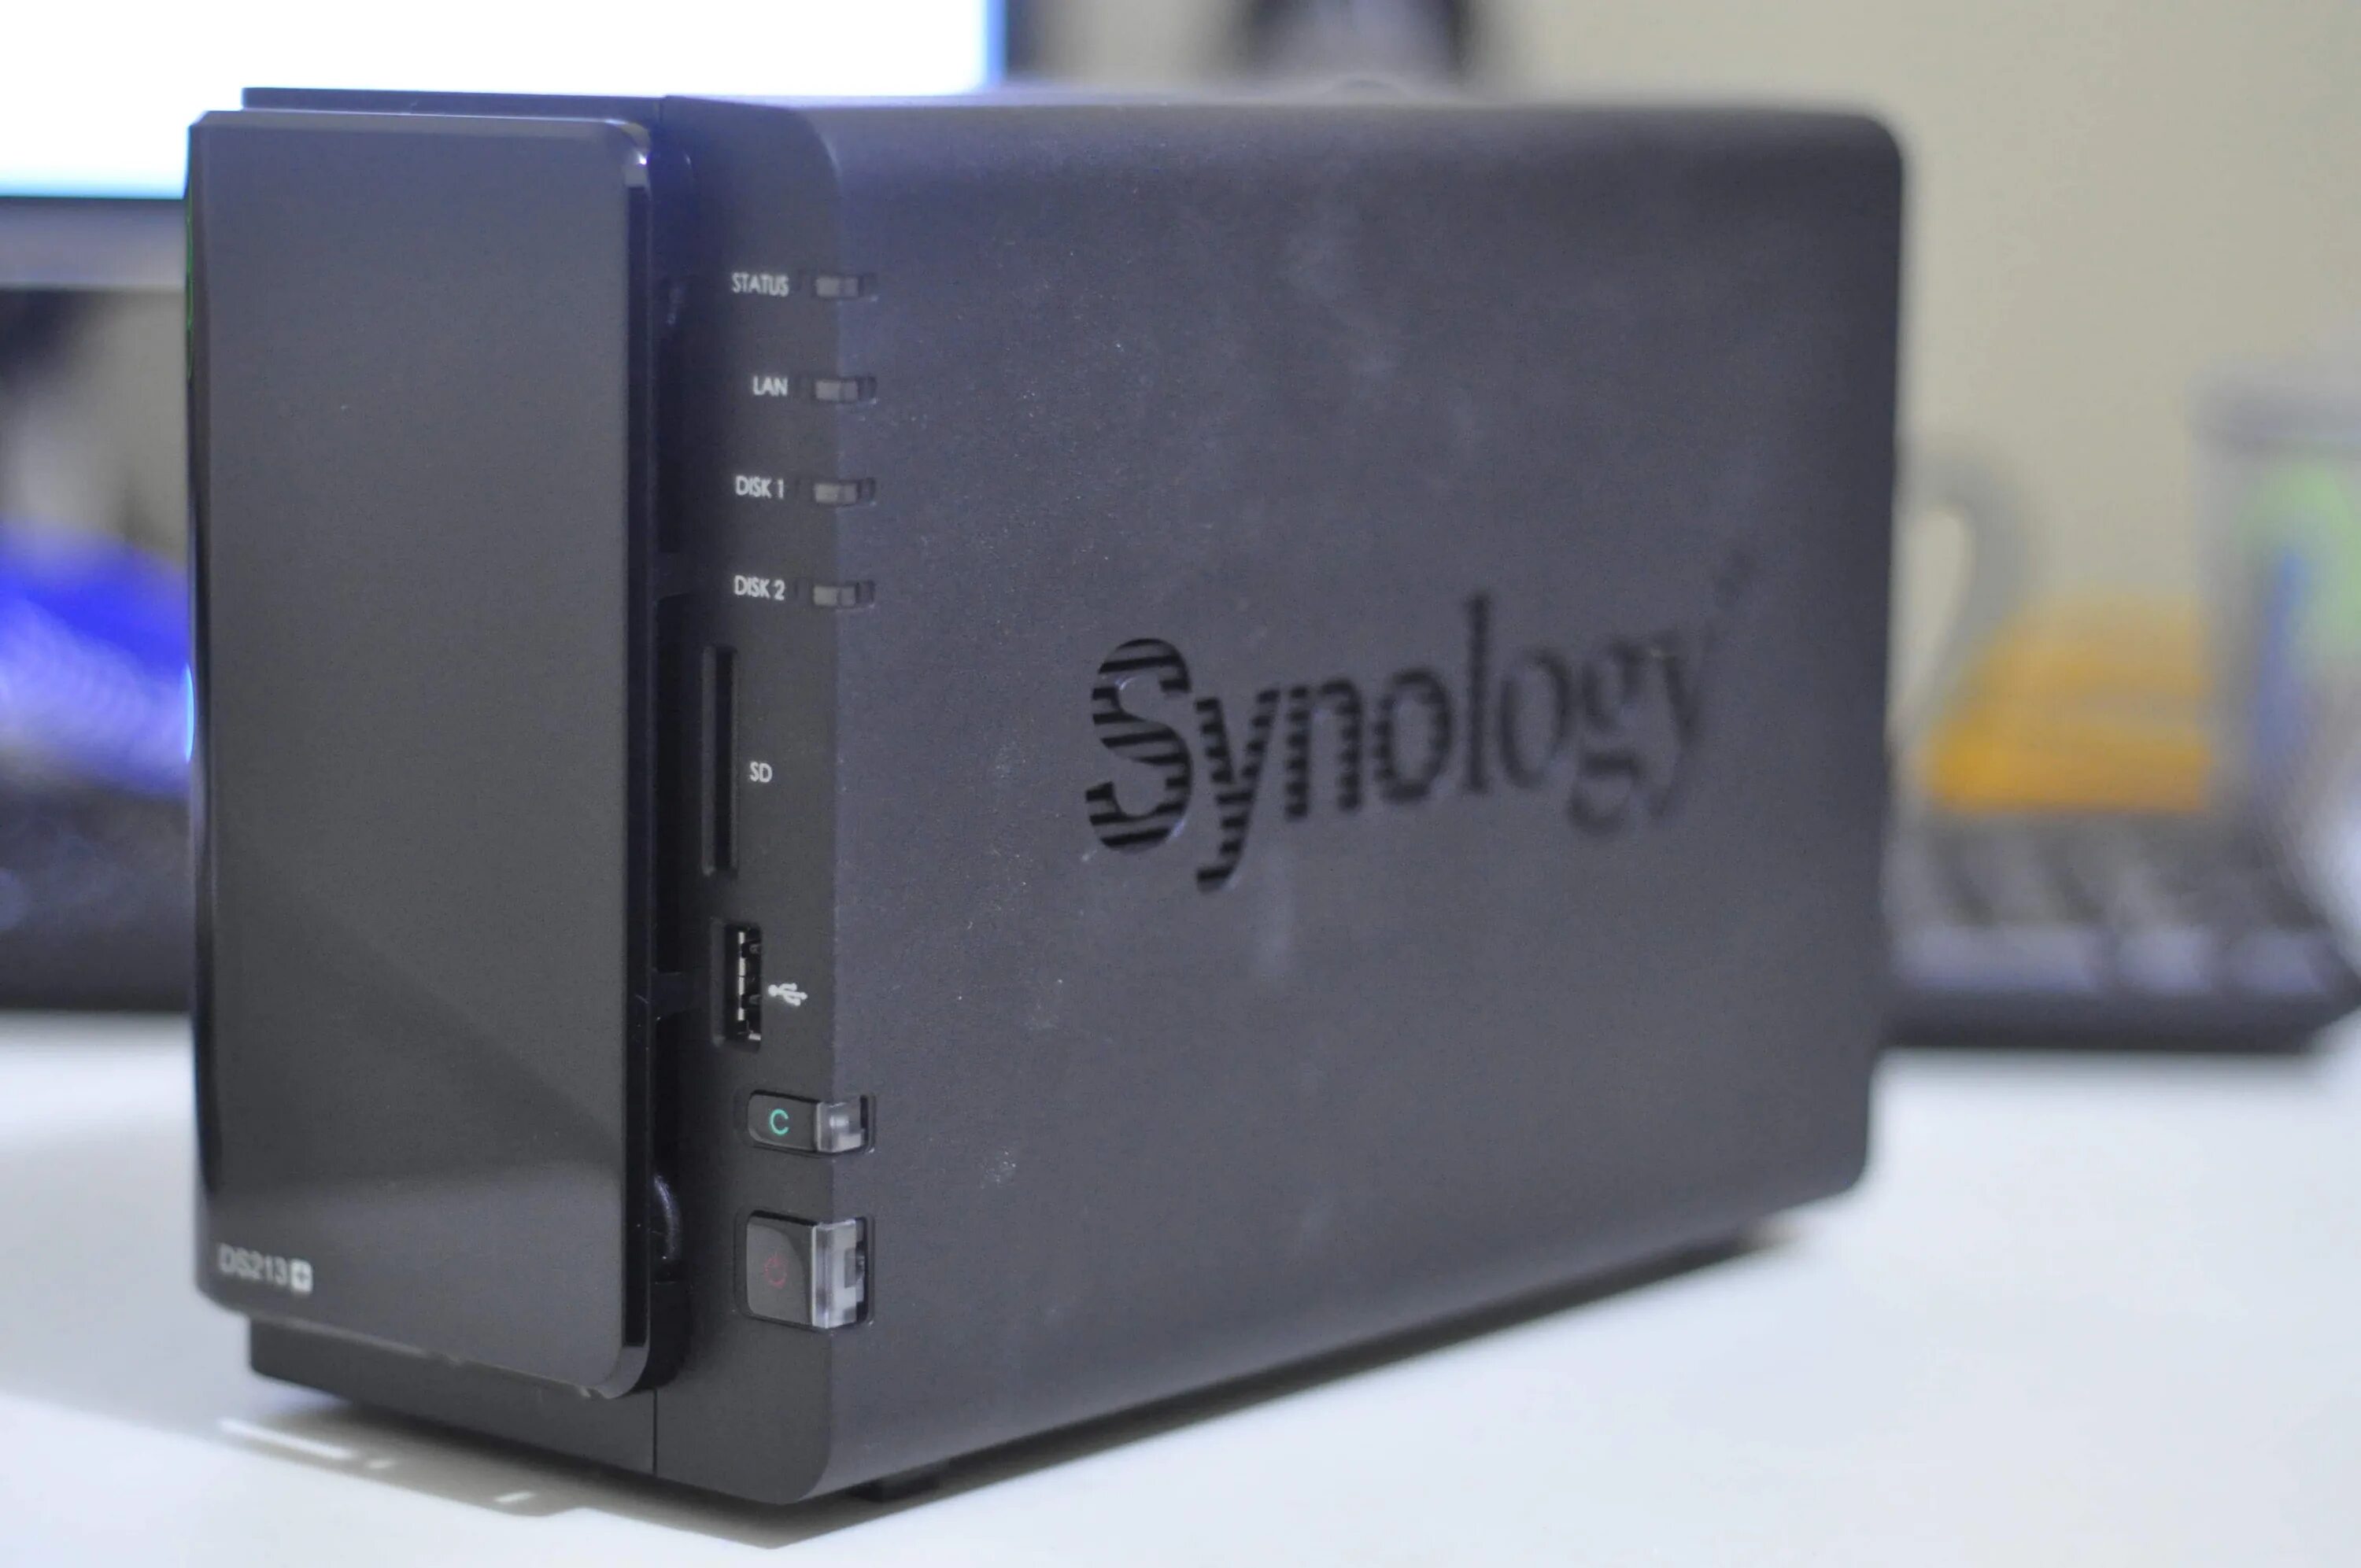 Synology ds213. Synology ds213 вентилятор. Синолоджи 213+. Synology ds720 Disassembly.